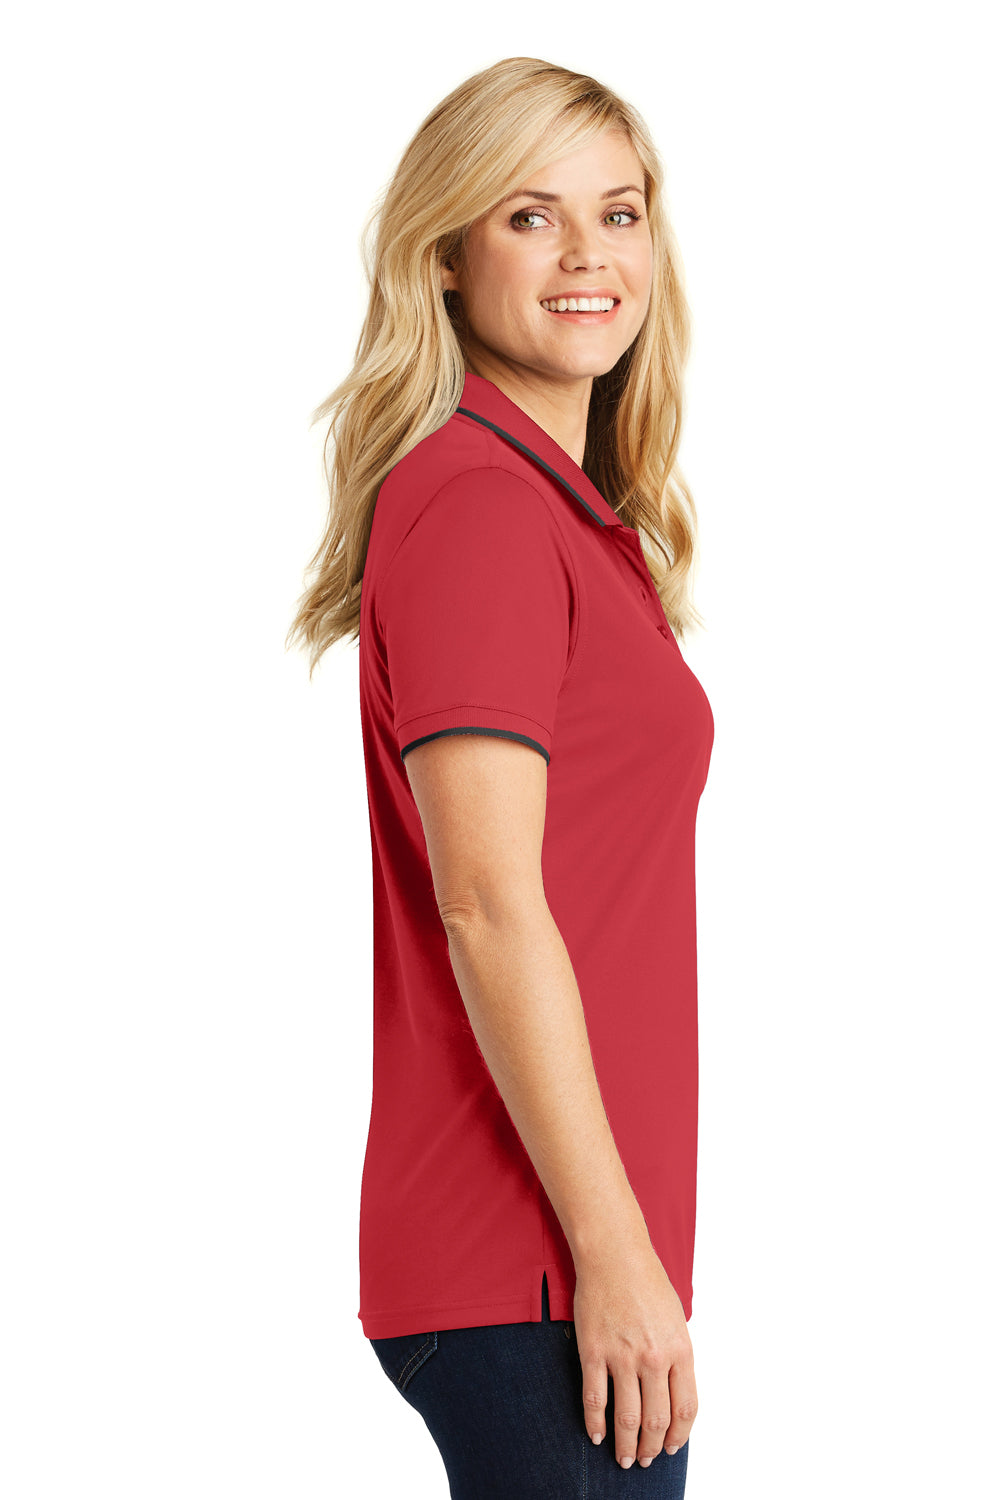 Port Authority LK111 Womens Dry Zone Moisture Wicking Short Sleeve Polo Shirt Red/Black Side